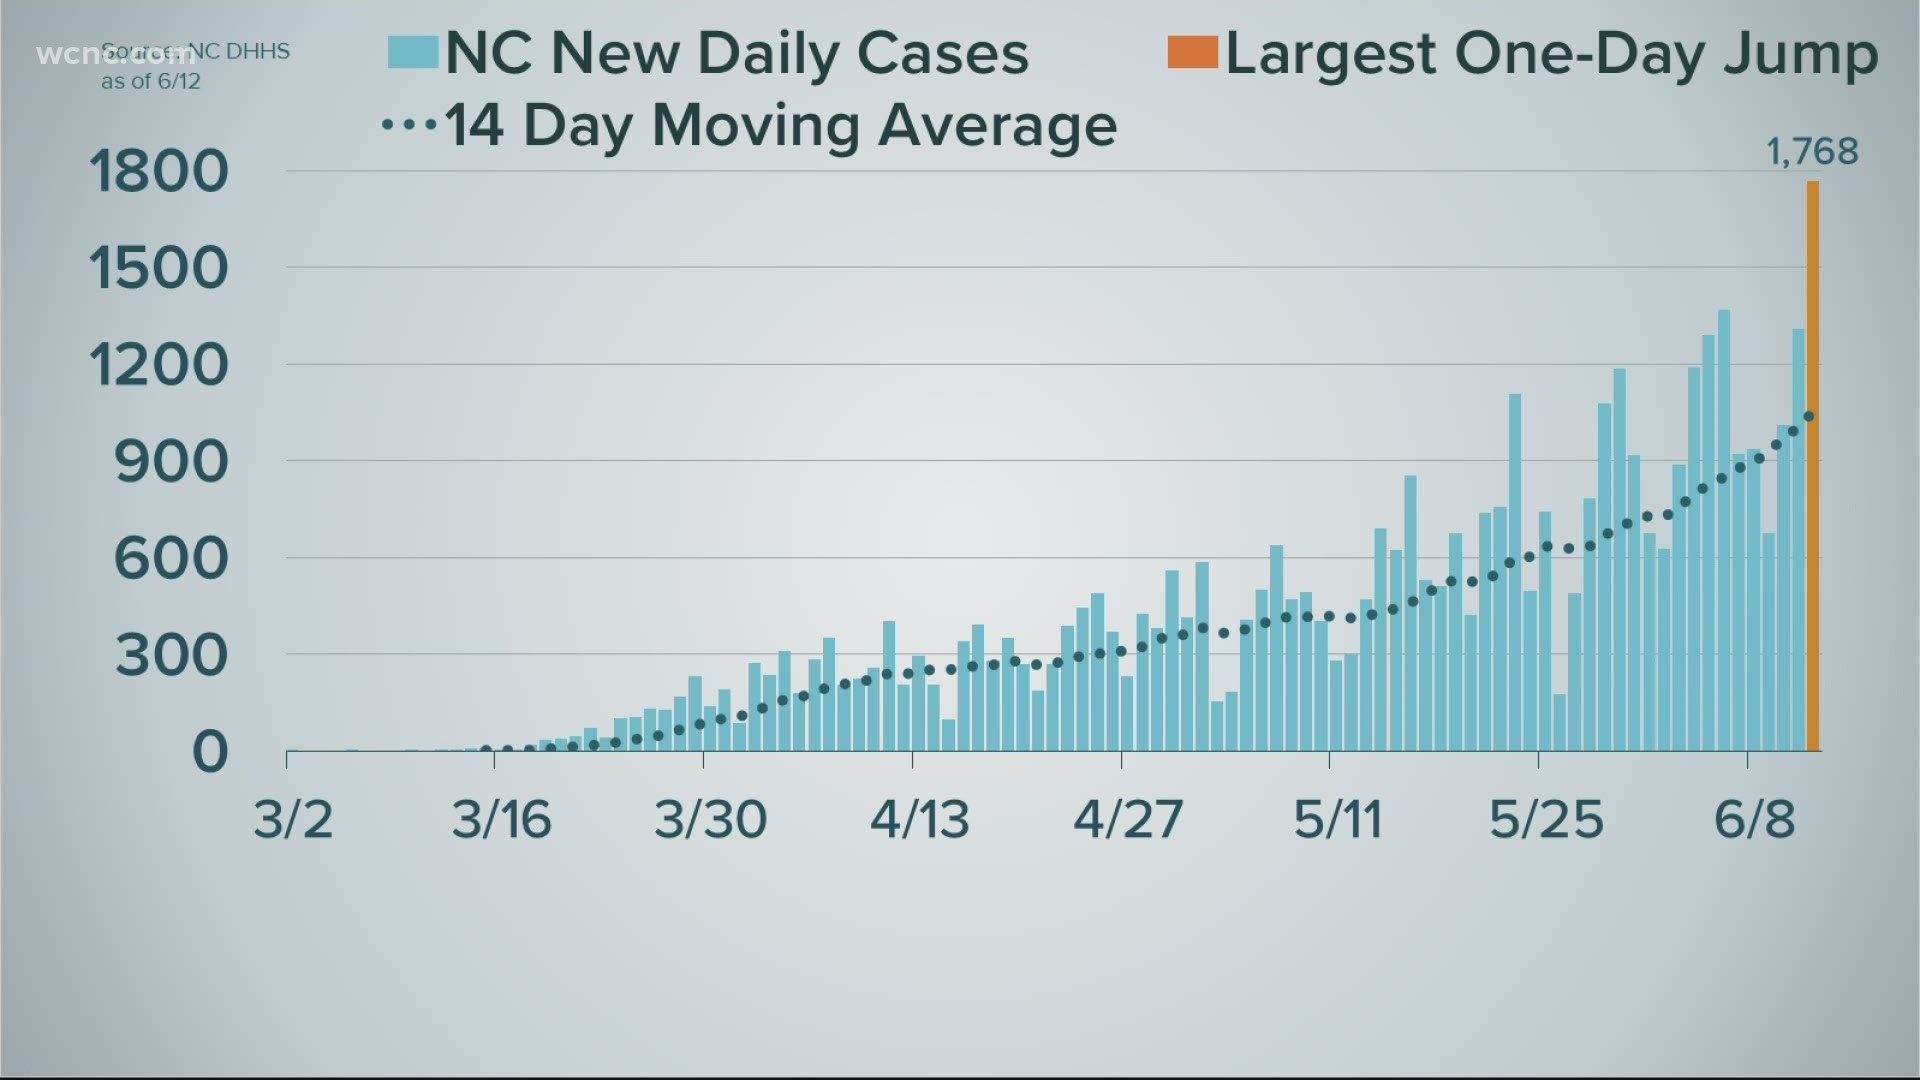 North Carolina reported 1,768 new cases Friday, which is the biggest single-day increase for coronavirus since the pandemic began.